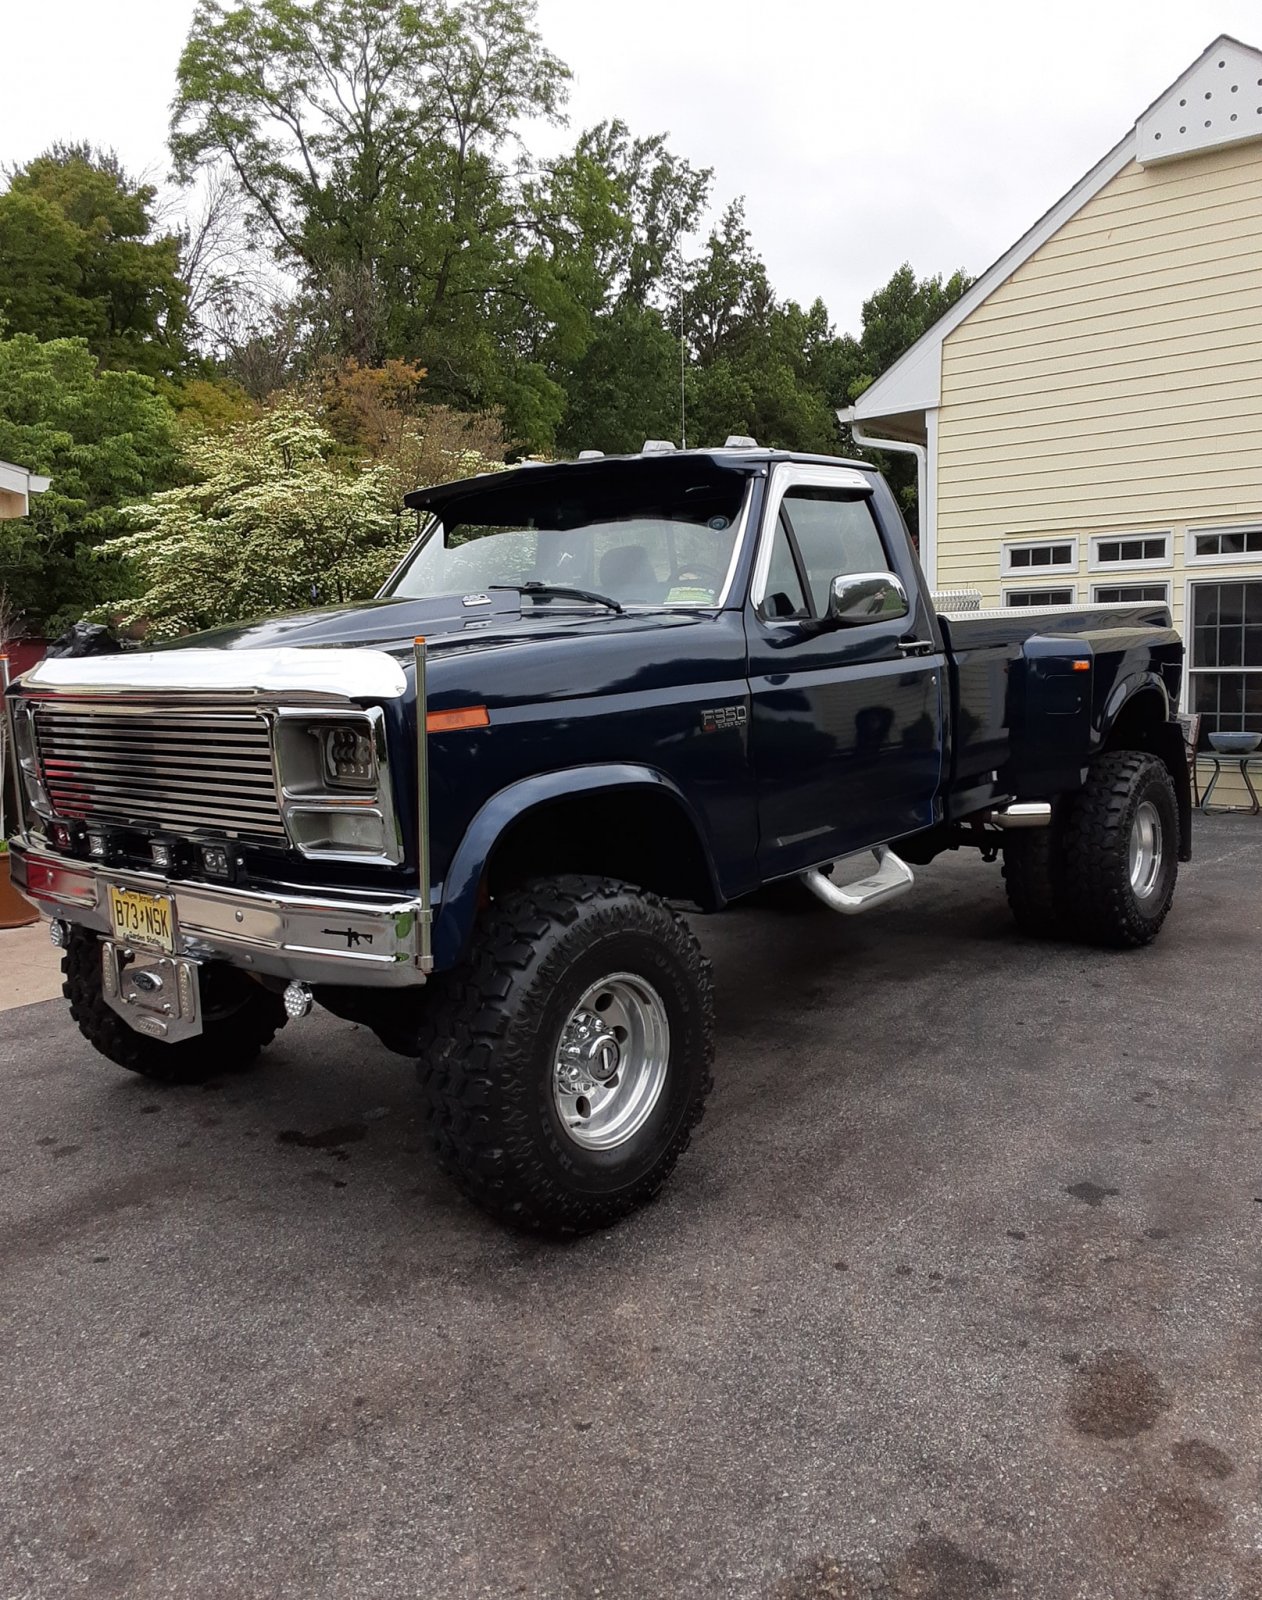 1985 Ford F-350 Dually On Super Swampers 2.jpg